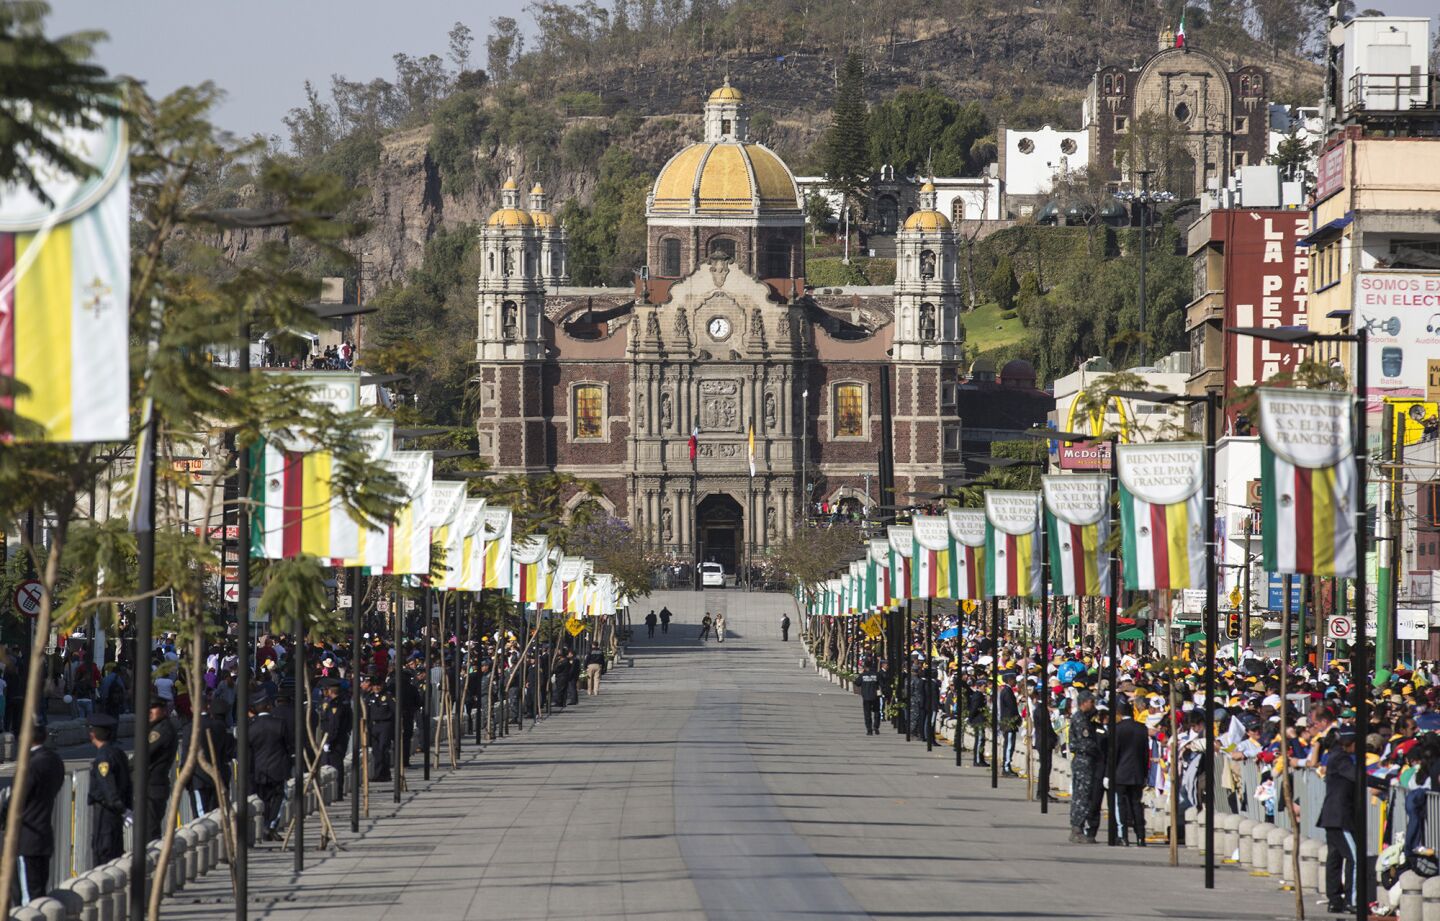 Pope Francis' motorcade arrives at the Basilica of Our Lady of Guadalupe during his visit in Mexico City.